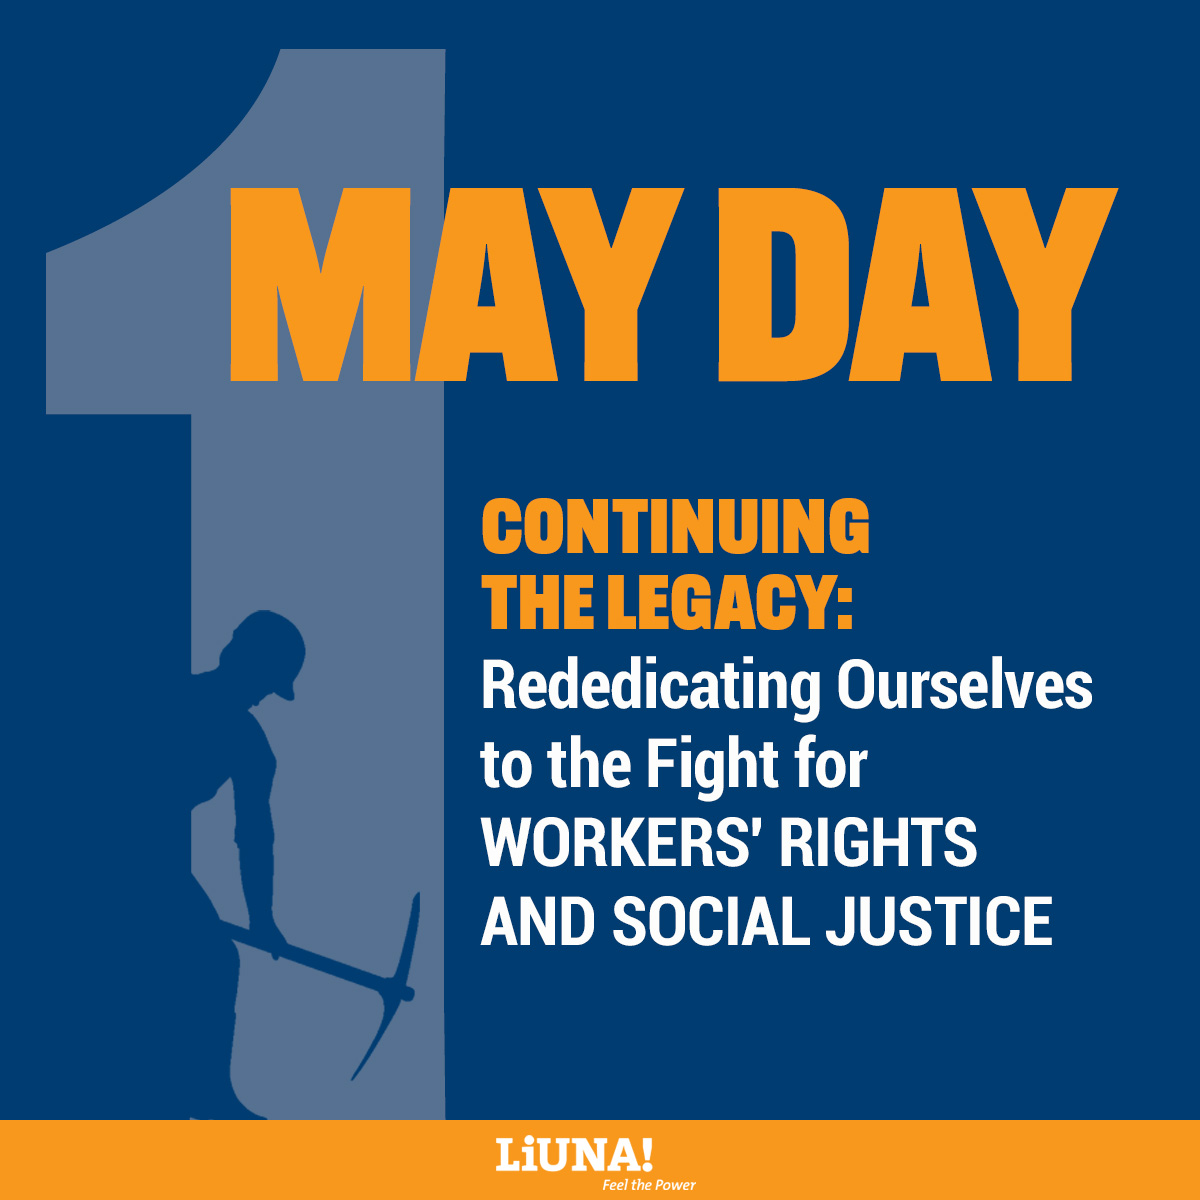 Today, we honor the legacy of those who paved the way before us. We stand united in solidarity, committed to carrying forward their enduring fight. SOLIDARITY FOREVER ✊

#LIUNA #LIUNABuilds #Solidarity #FeelThePower